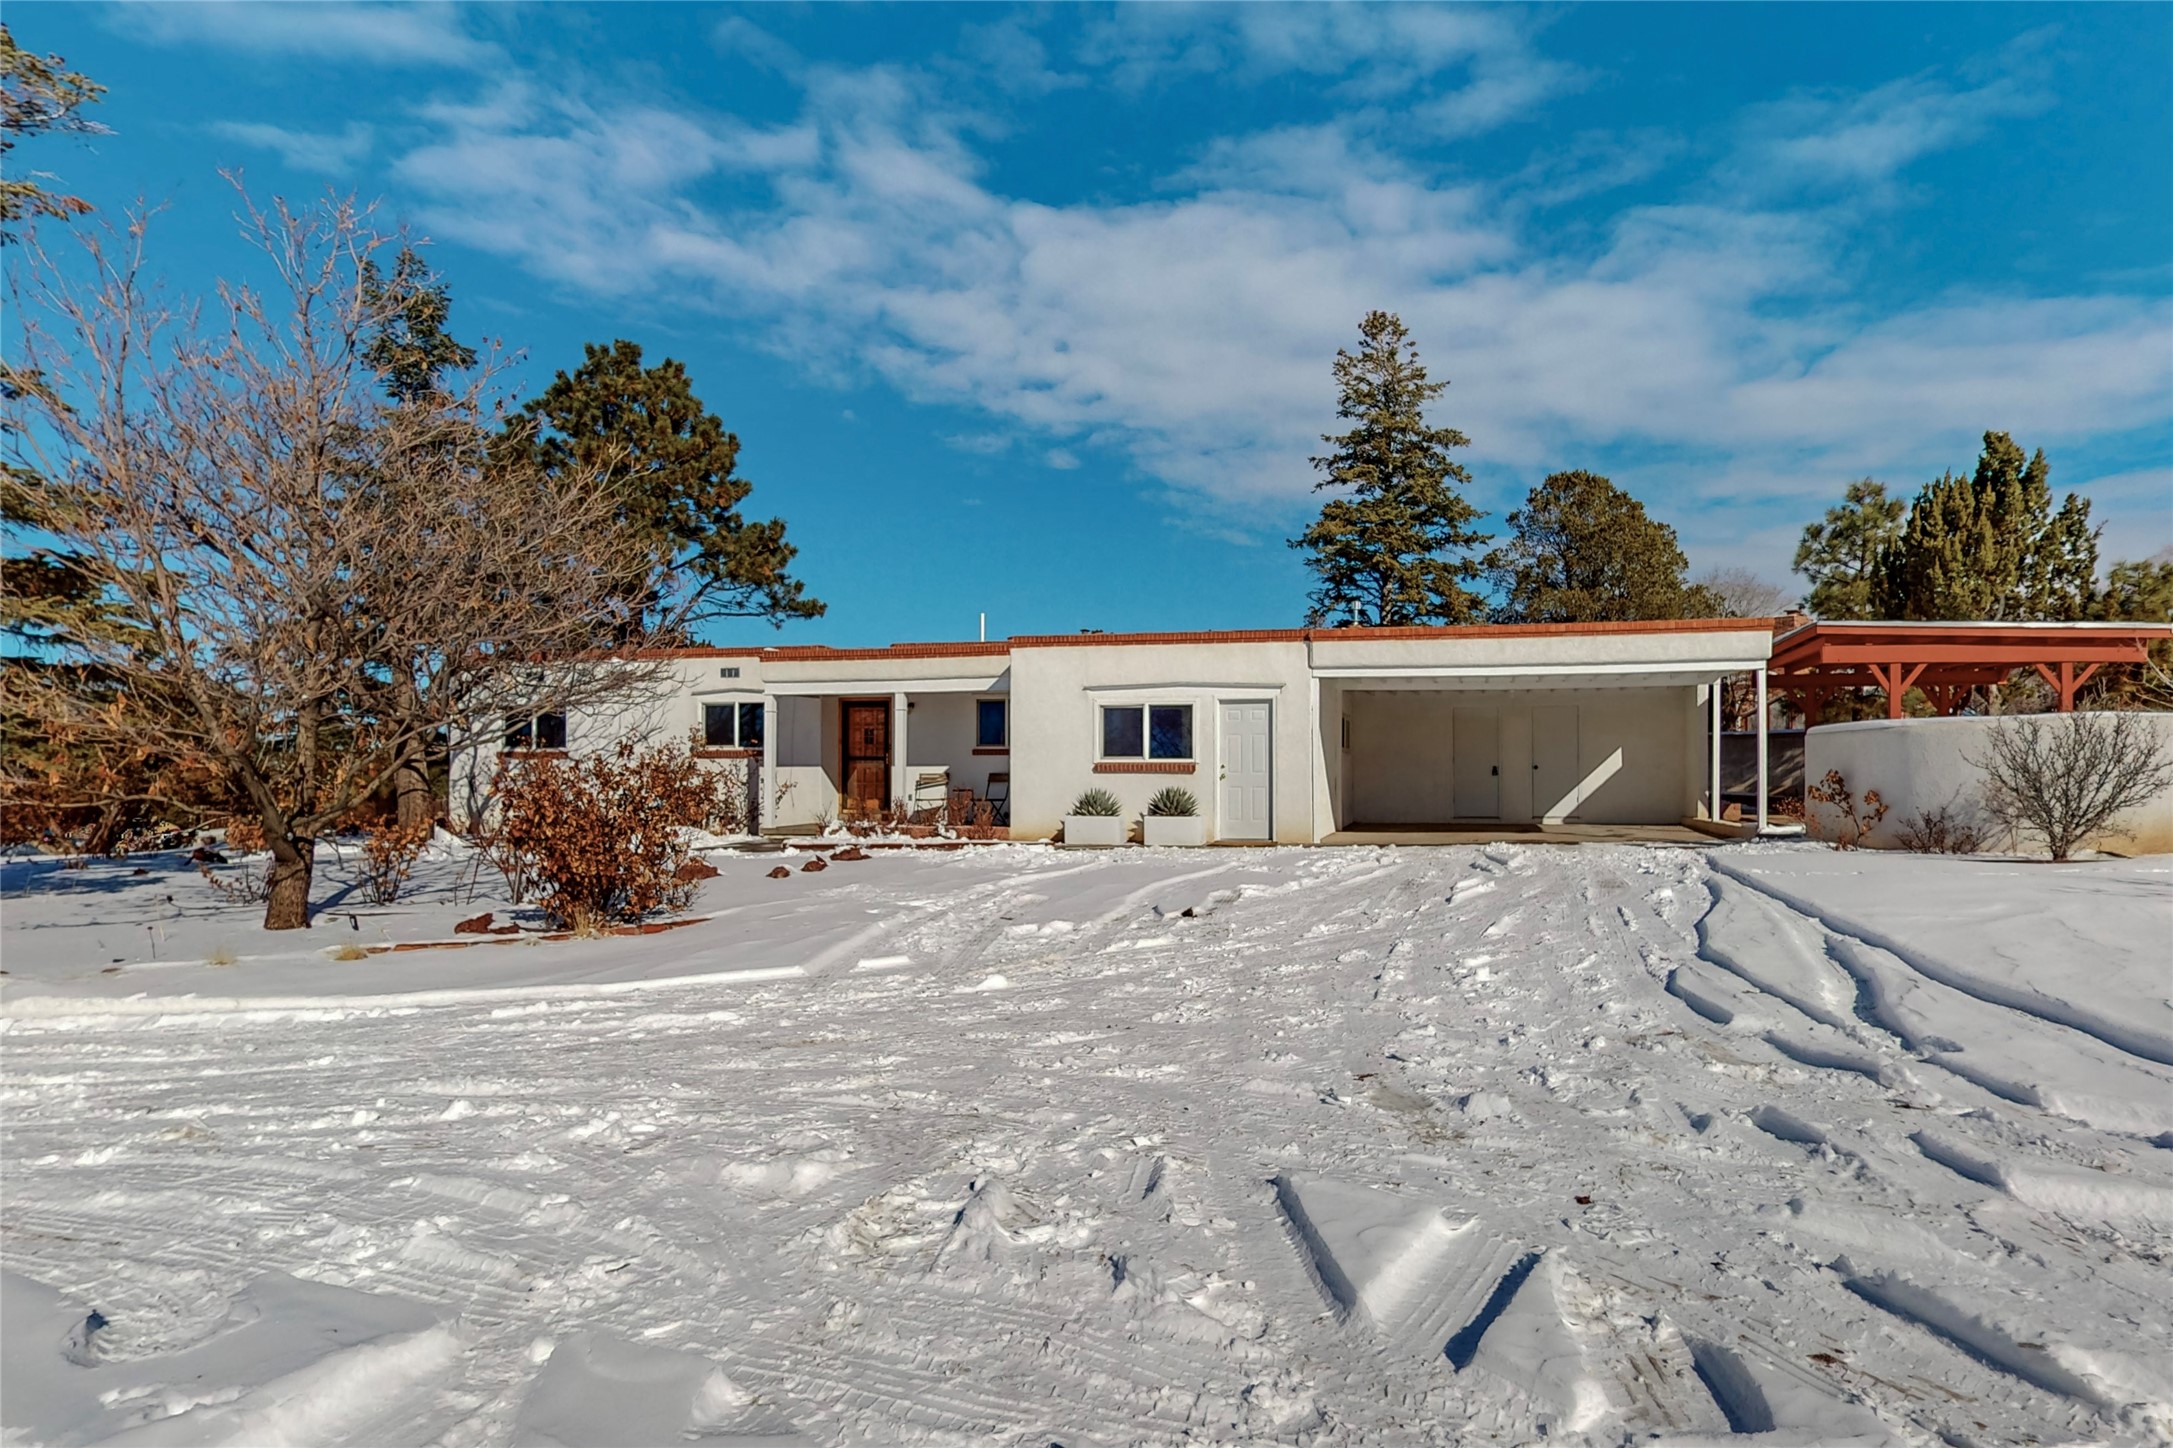 416 W San Mateo Road, Santa Fe, New Mexico 87505, 3 Bedrooms Bedrooms, ,2 BathroomsBathrooms,Residential,For Sale,416 W San Mateo Road,202400072